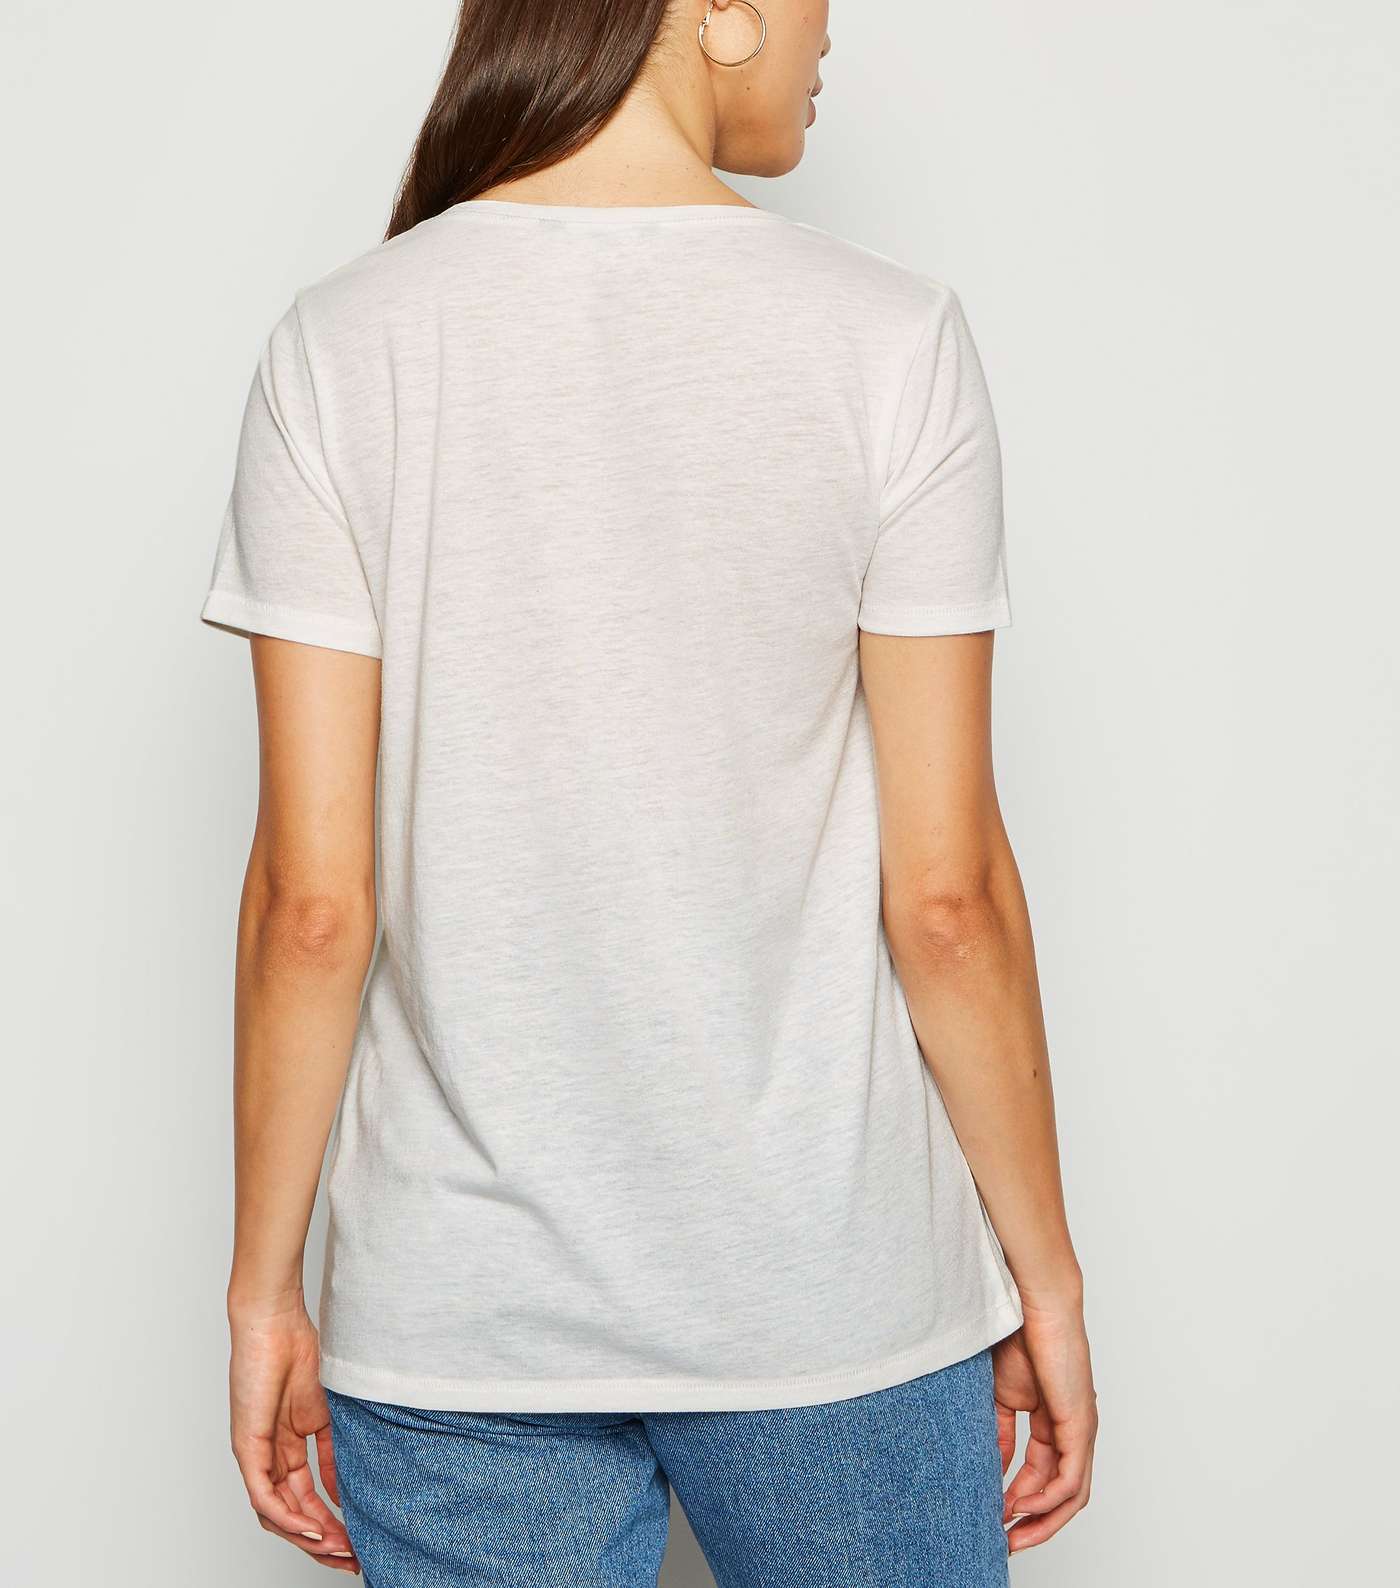 Off White Marl Scoop Neck T-Shirt Image 3